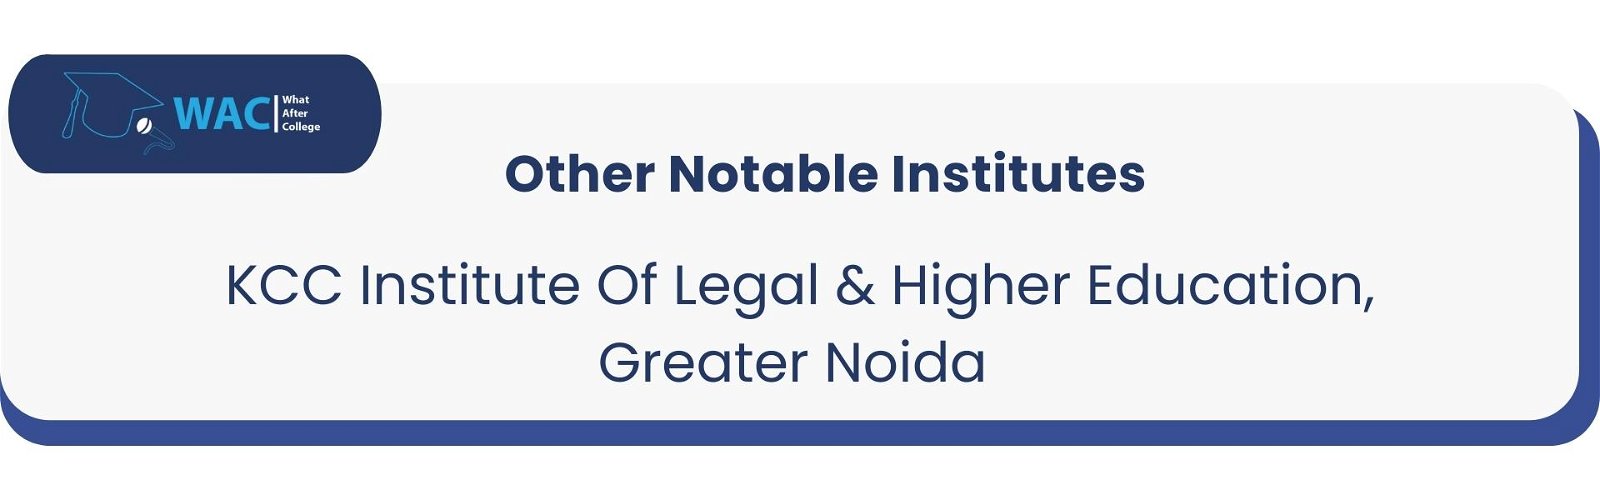 KCC Institute Of Legal & Higher Education